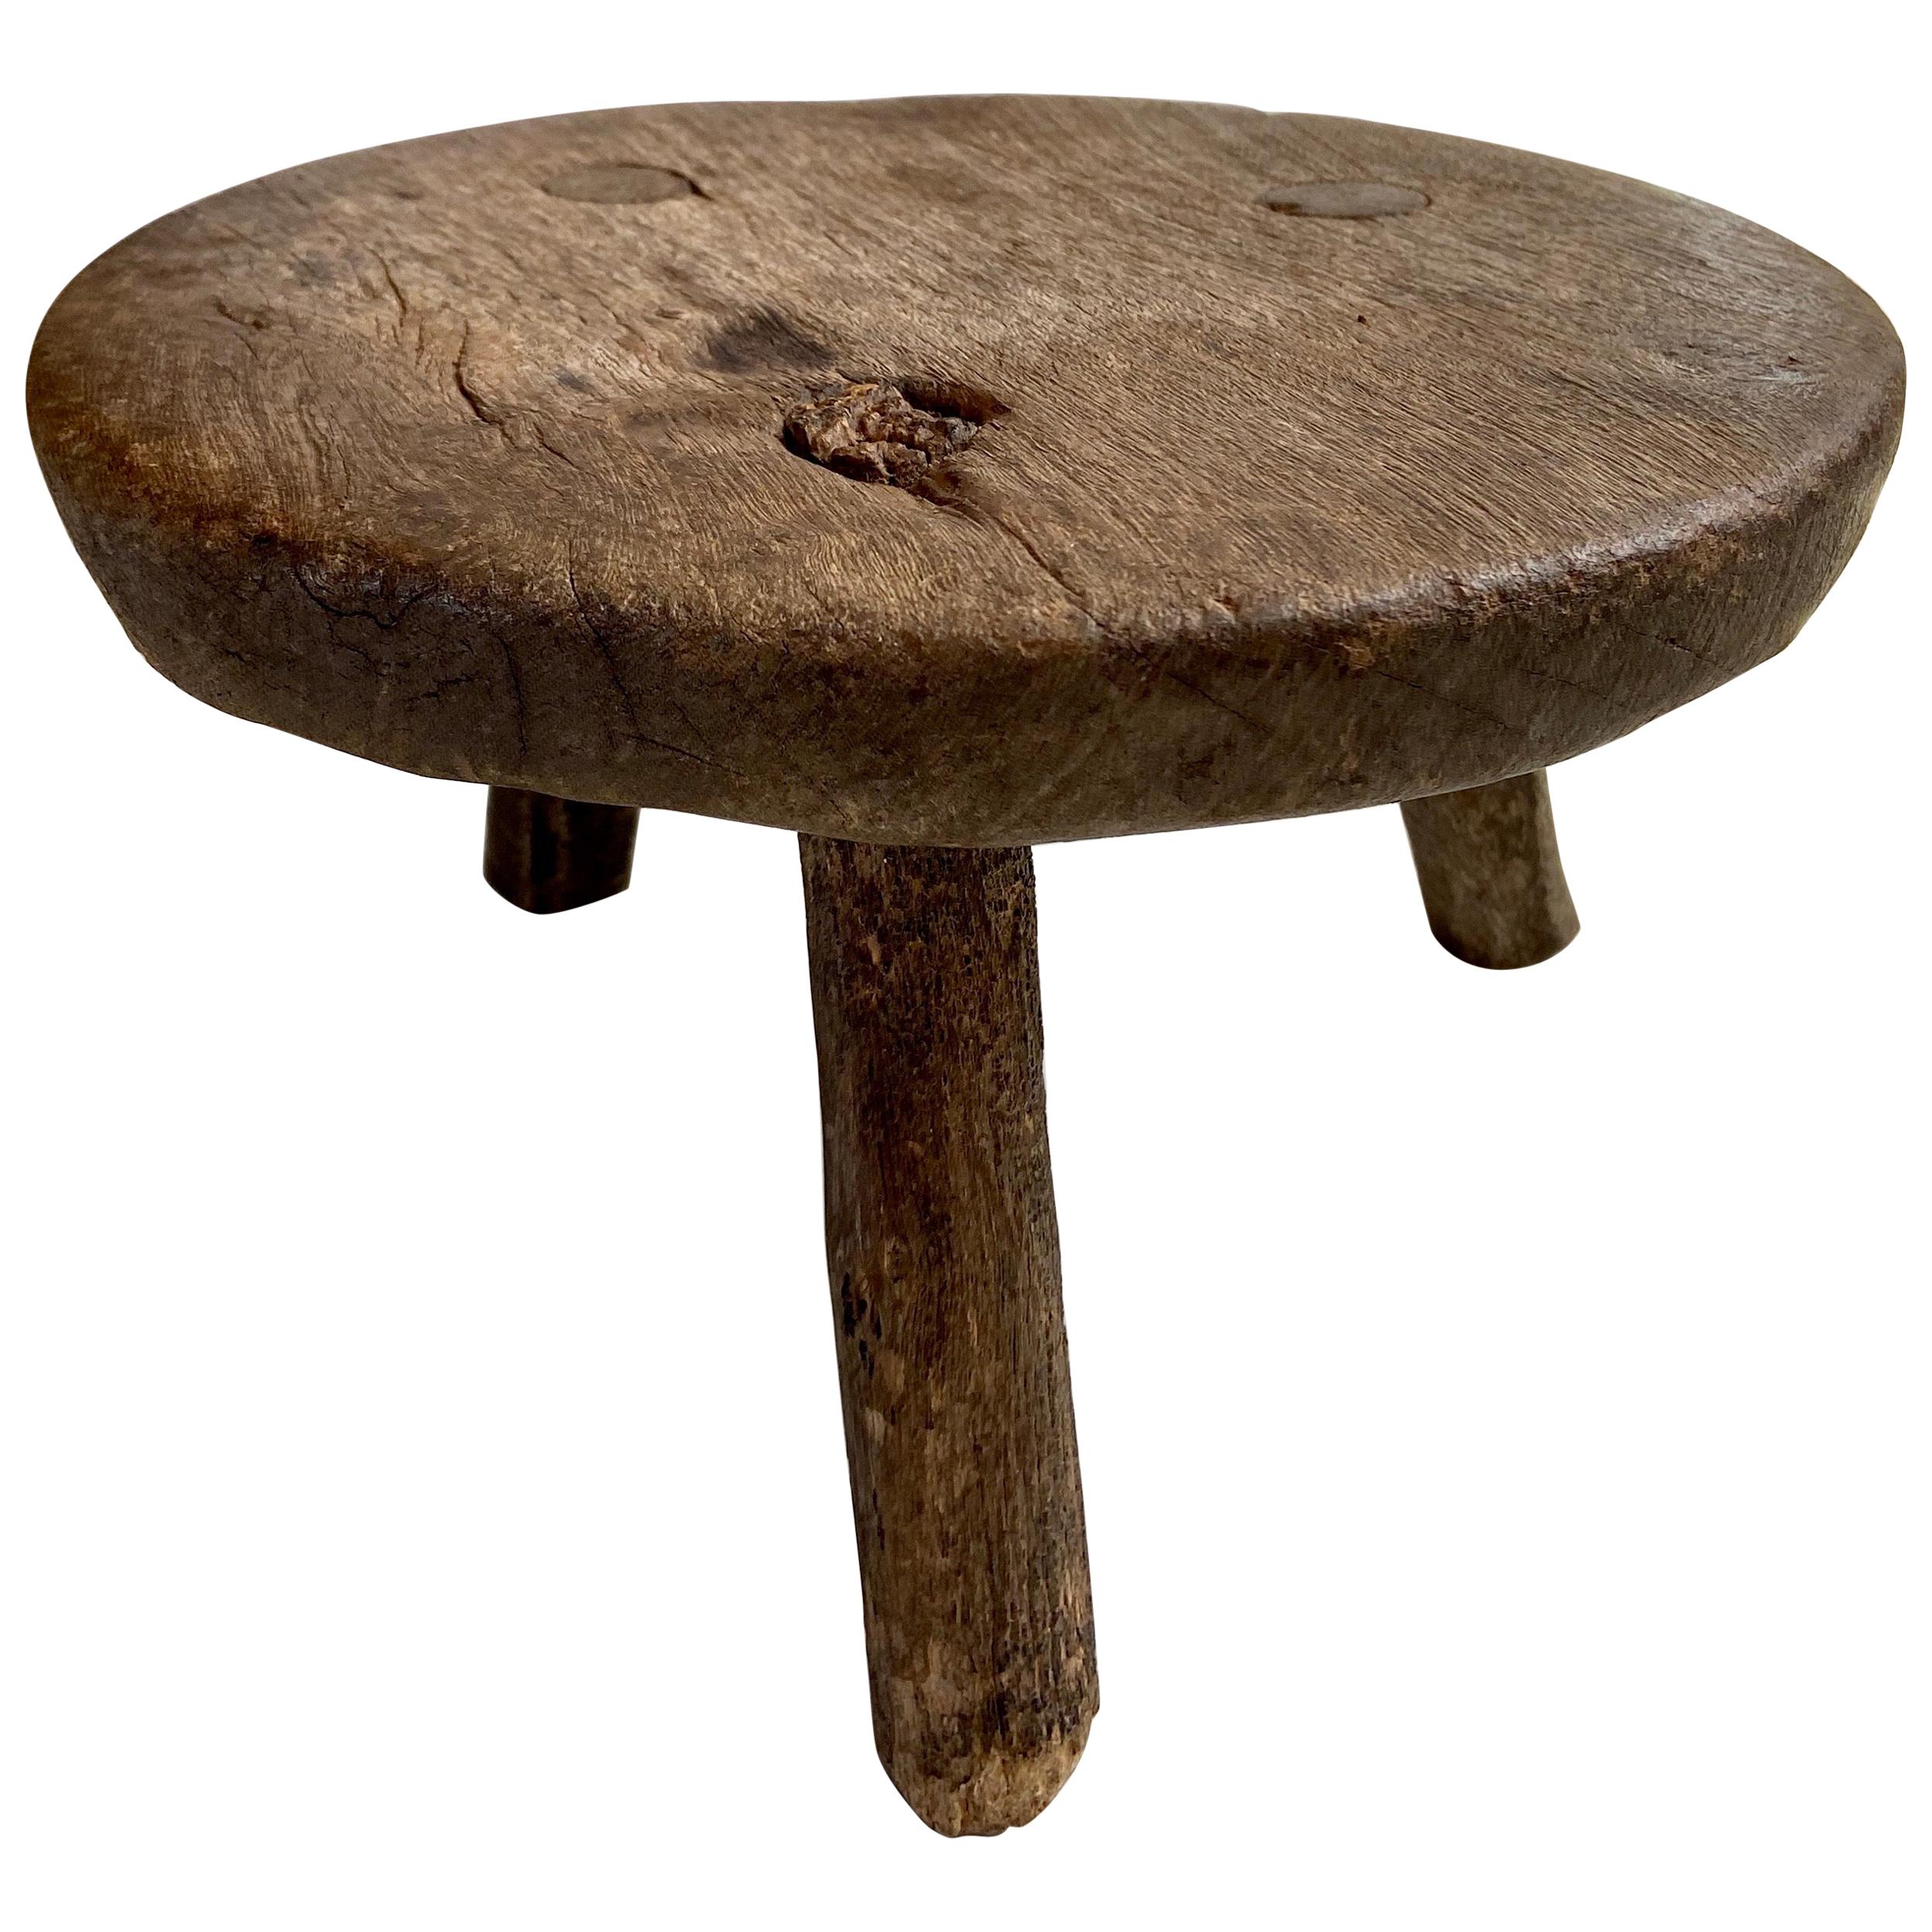 Mid-20th Century Mesquite Stool from Mexico